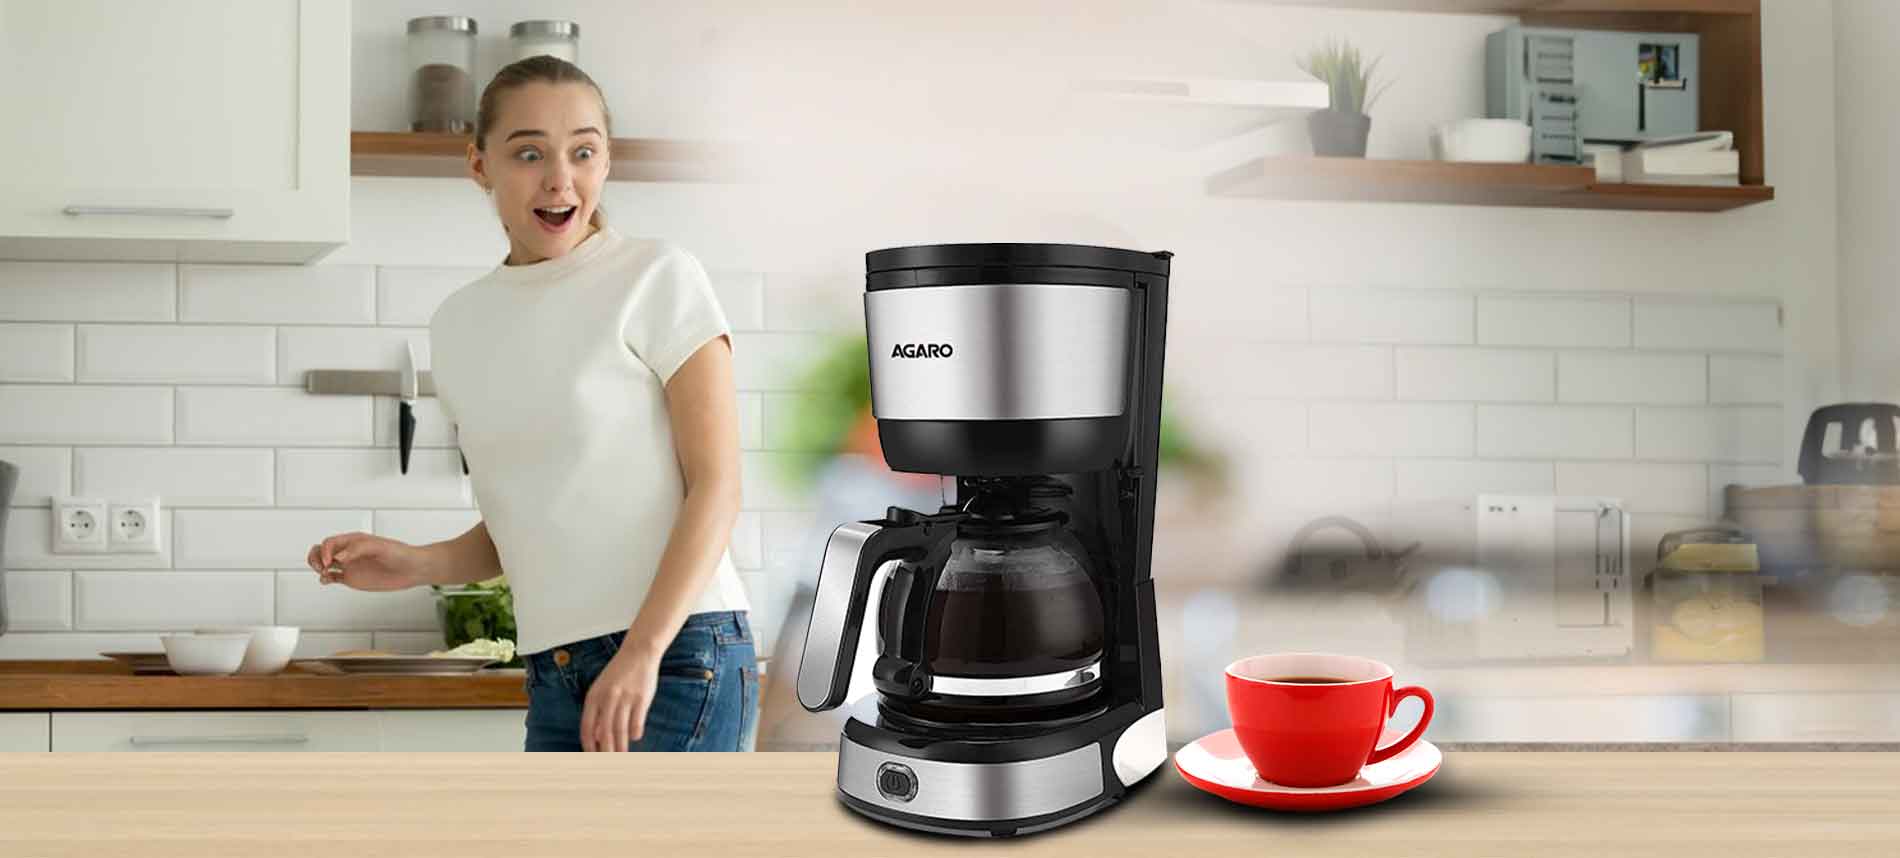 Best Coffee Maker Price in India: Where to Find the Best Bargains! – Agaro